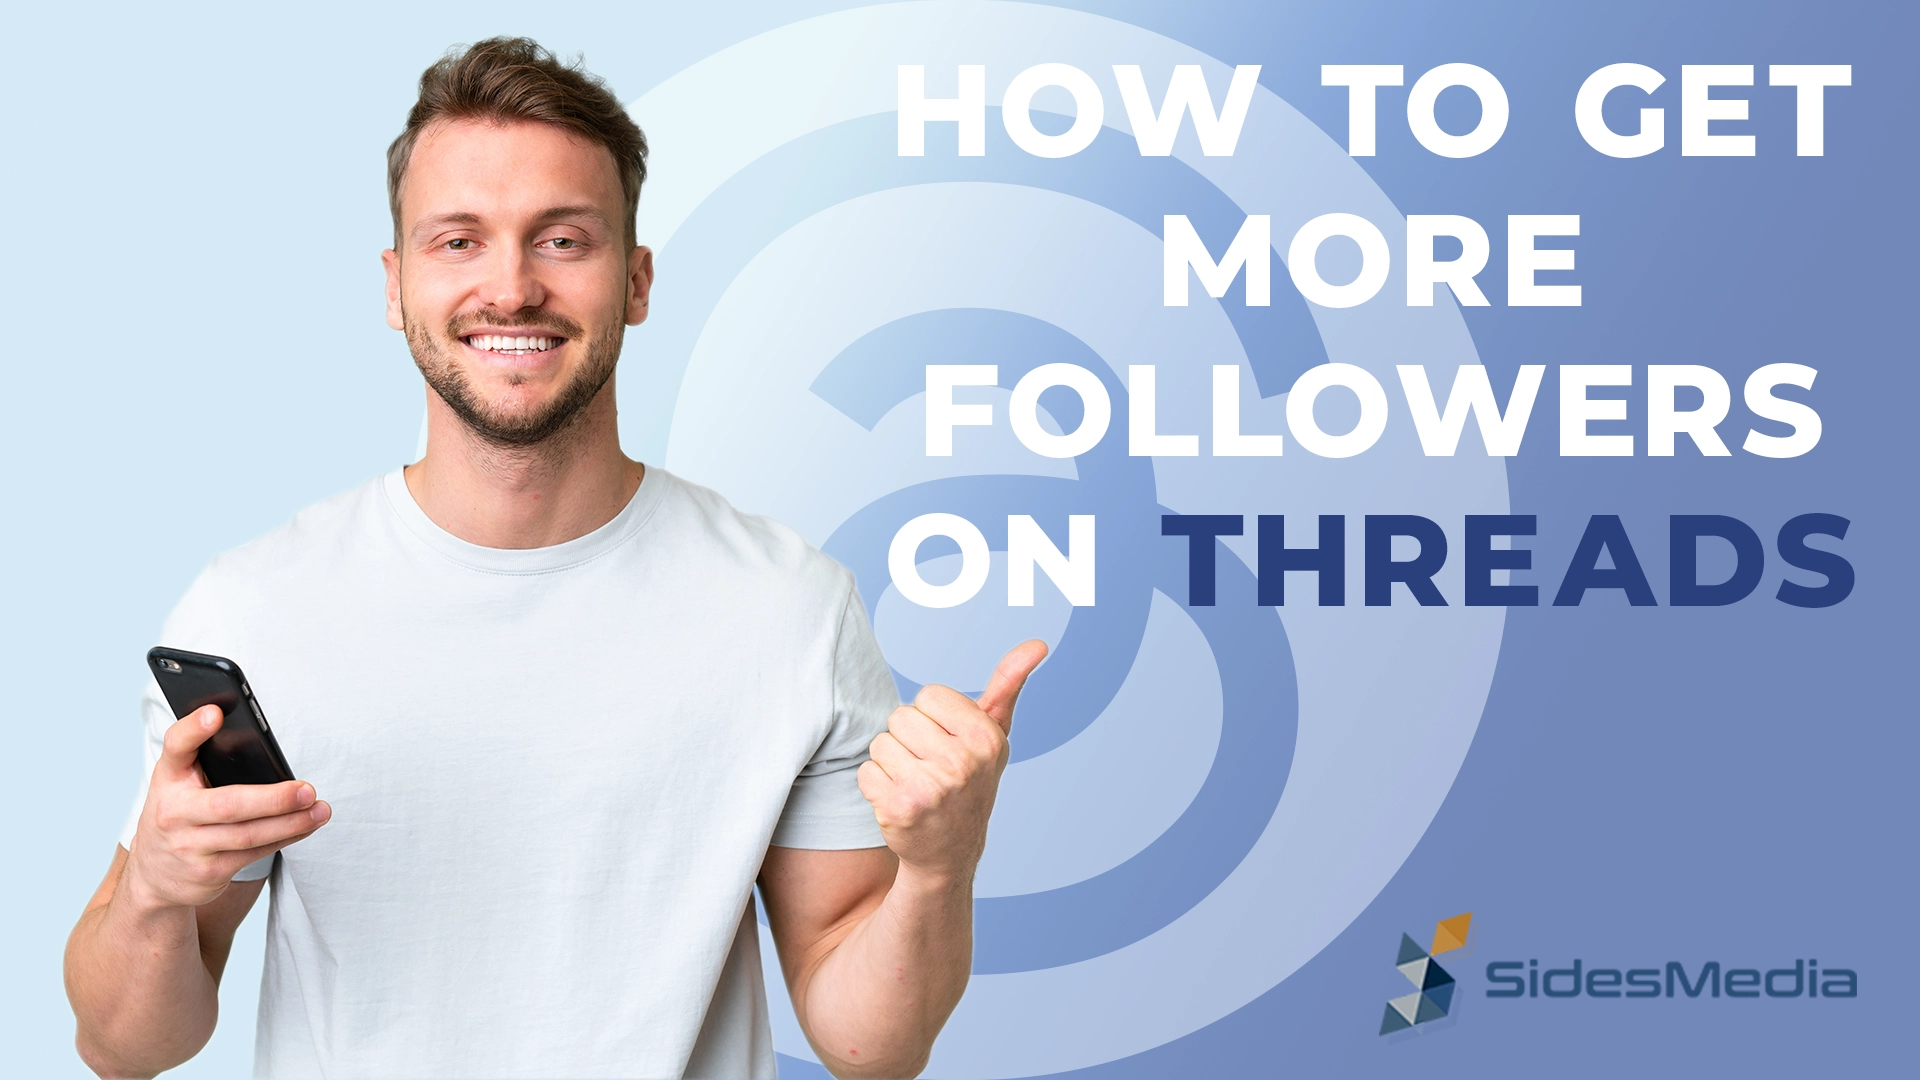 10 Effective Ways How to Get More Followers on Threads